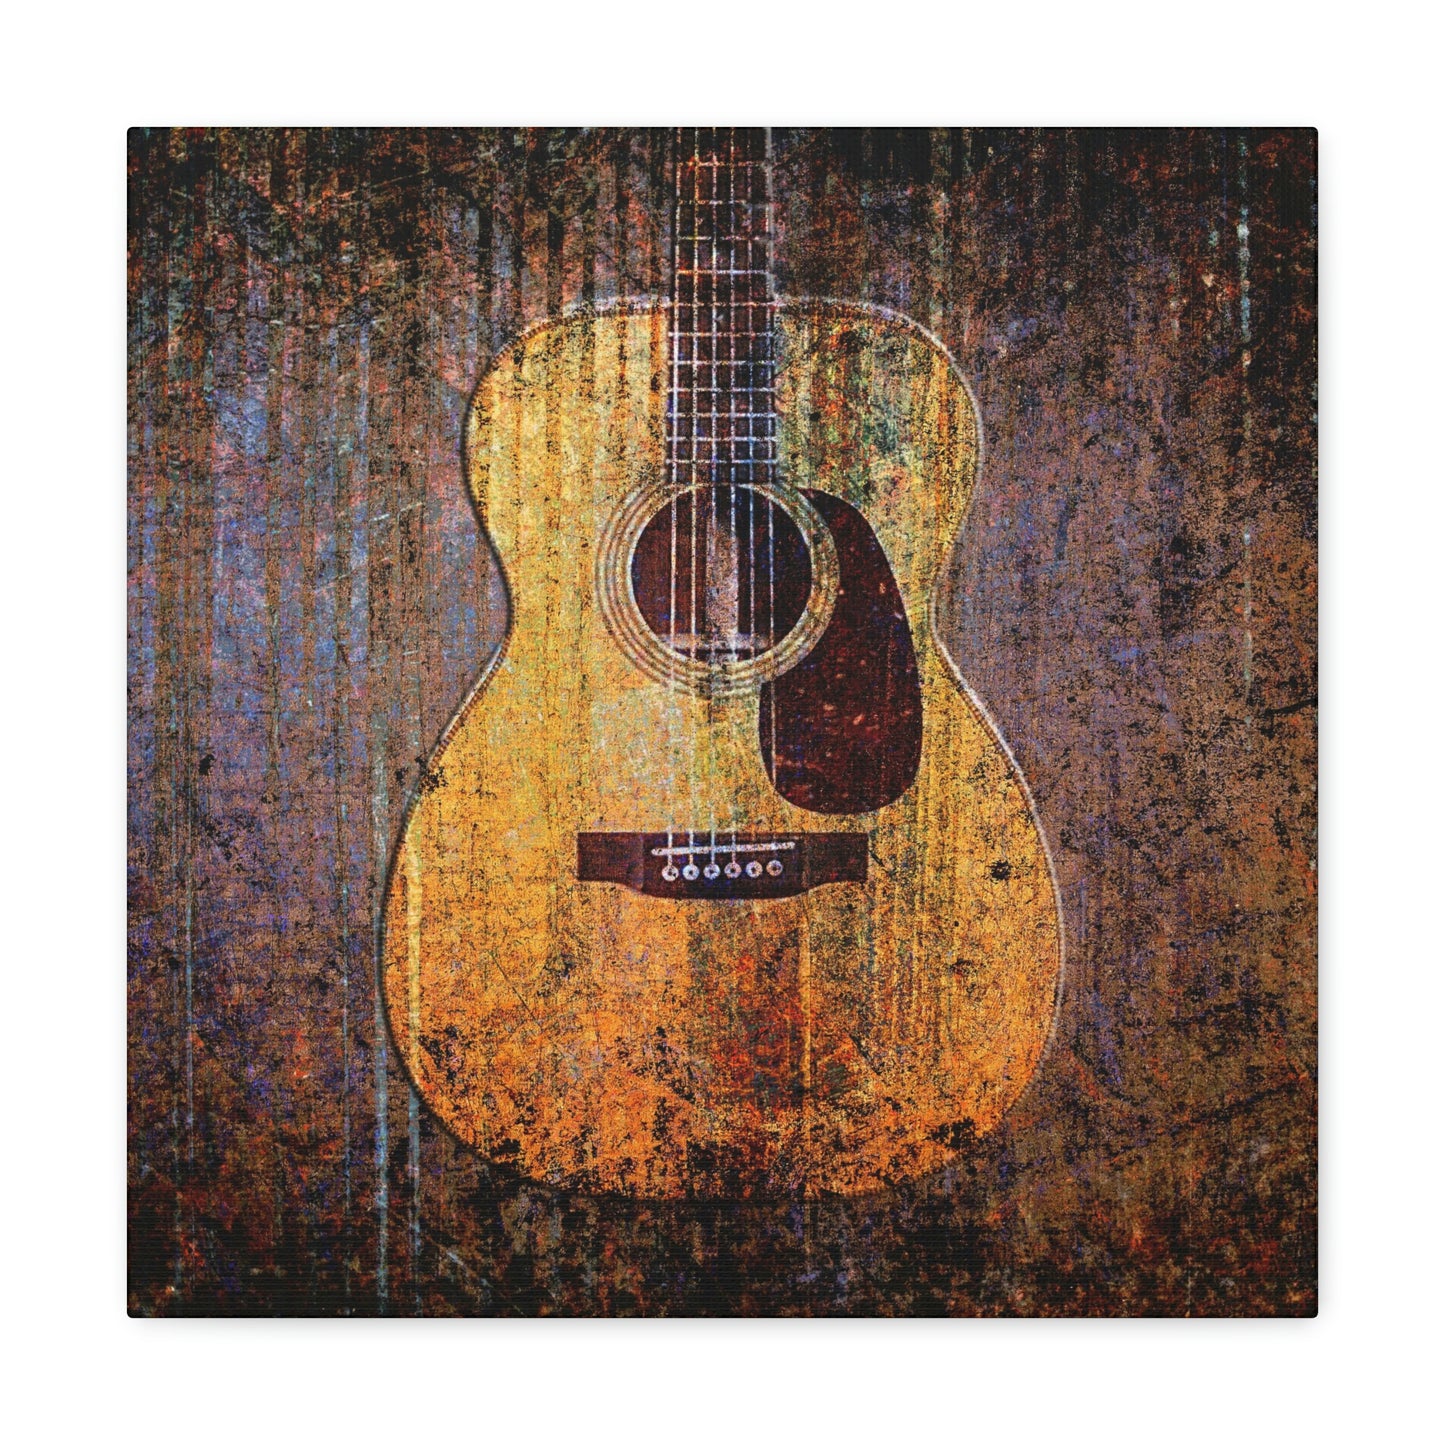 Gift for Guitarists and Musicians - Acoustic Guitar Print on Unframed Stretched Canvas